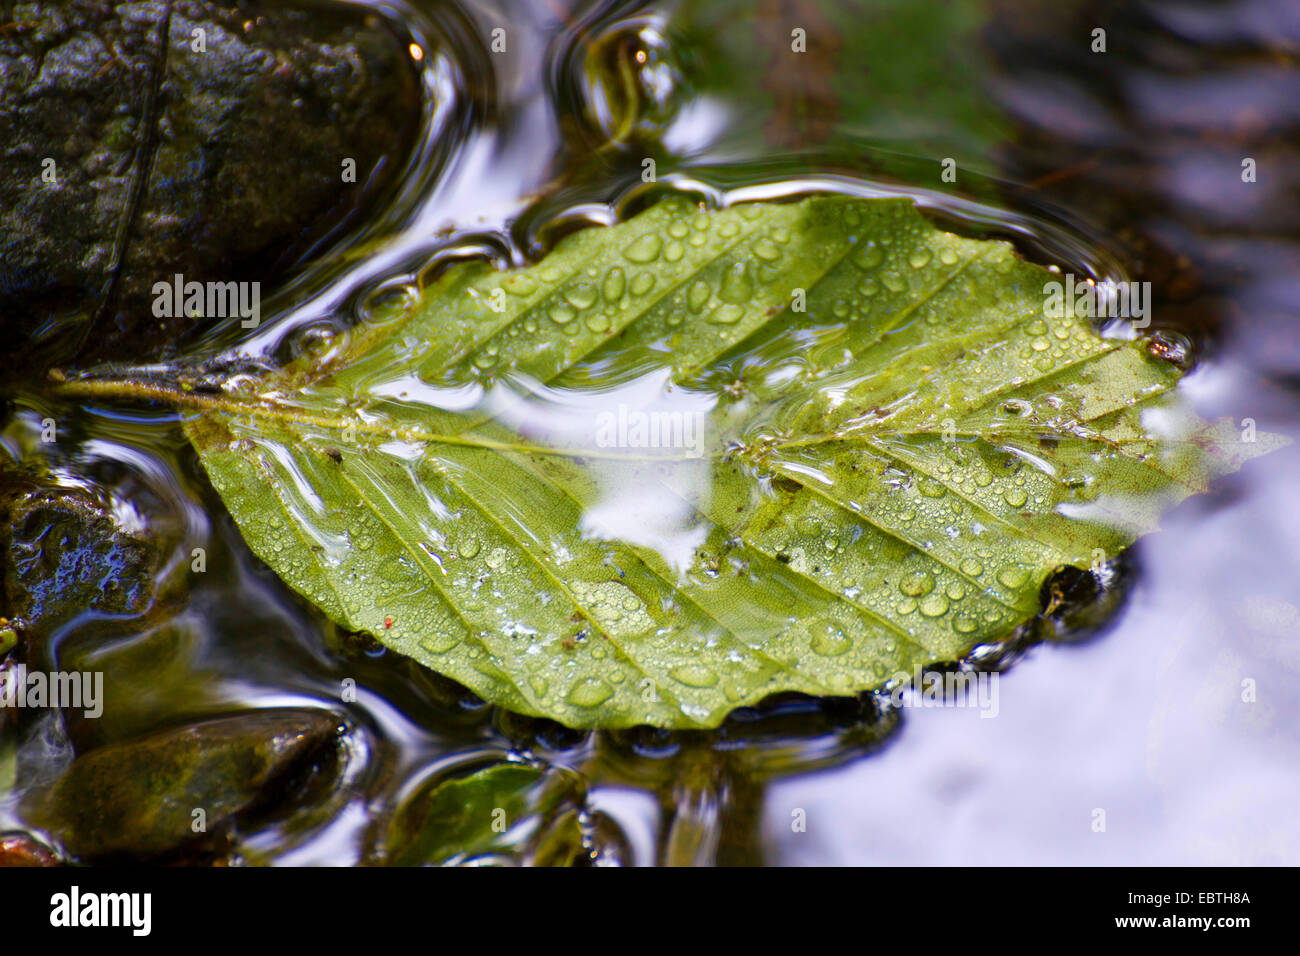 common beech (Fagus sylvatica), beech leaf covered with drops on a water surface, Germany, Saxony, Vogtland, Triebtal Stock Photo